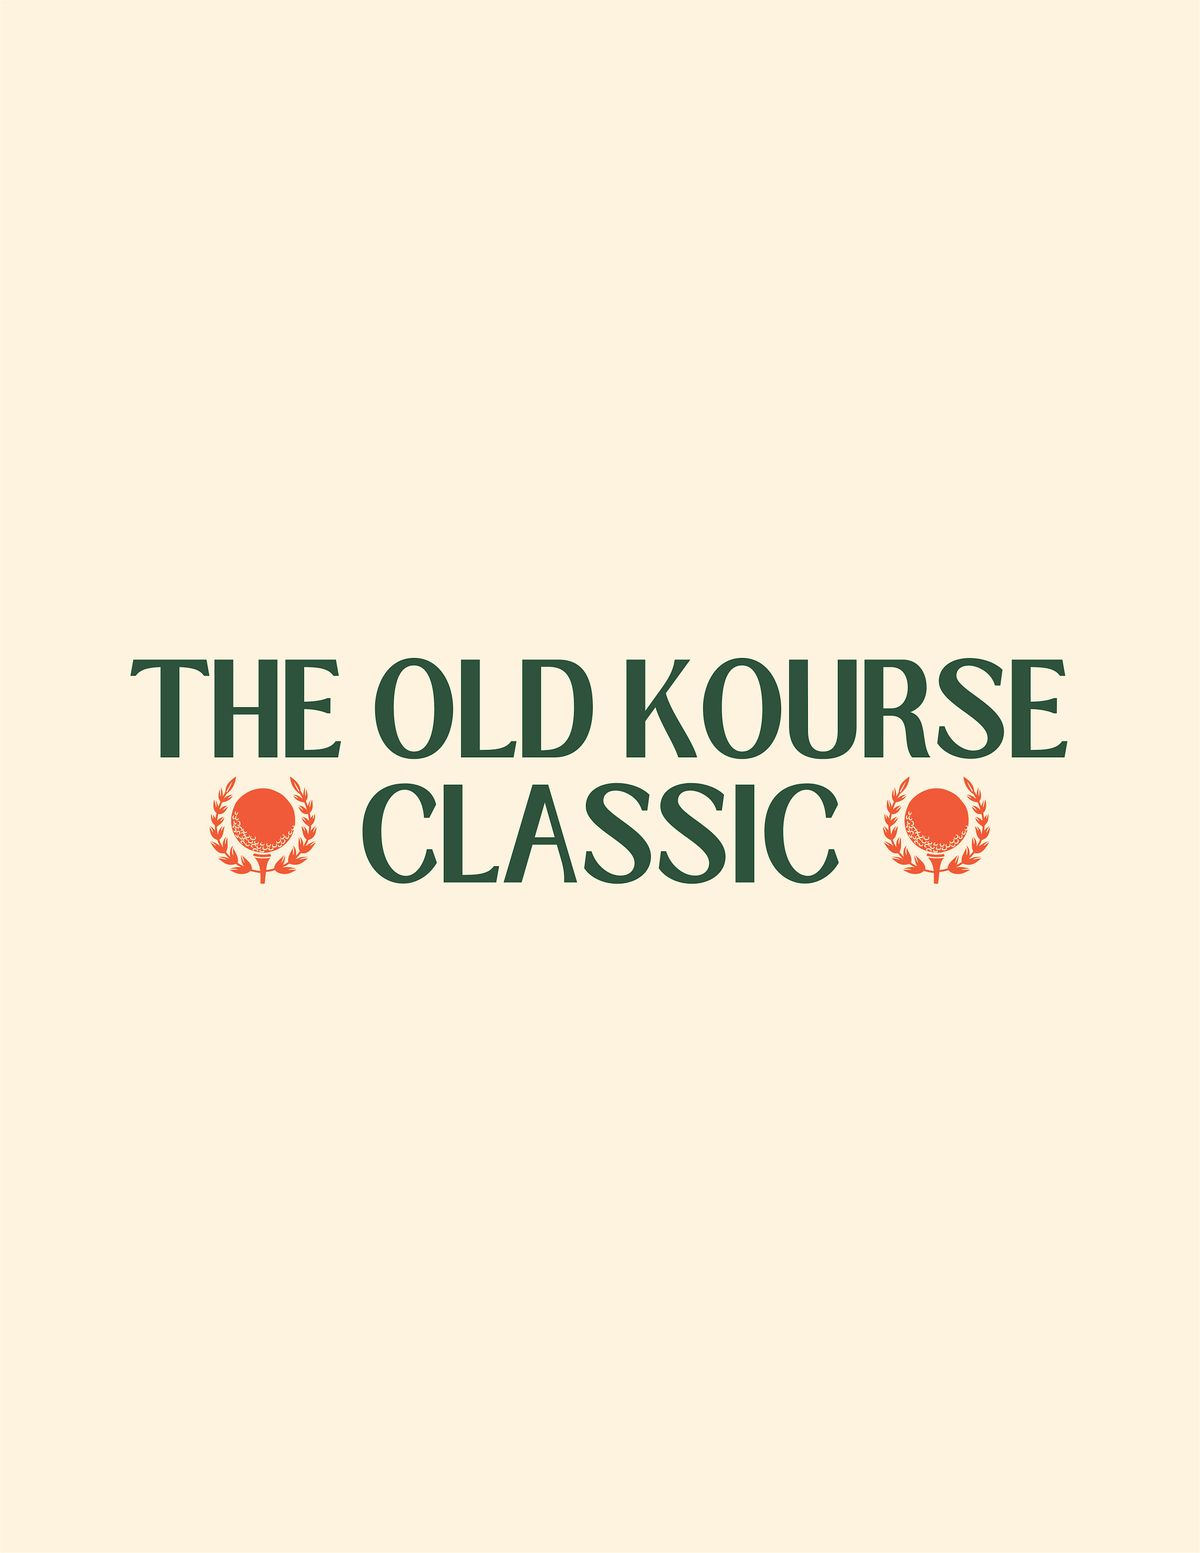 The Old Kourse Classic